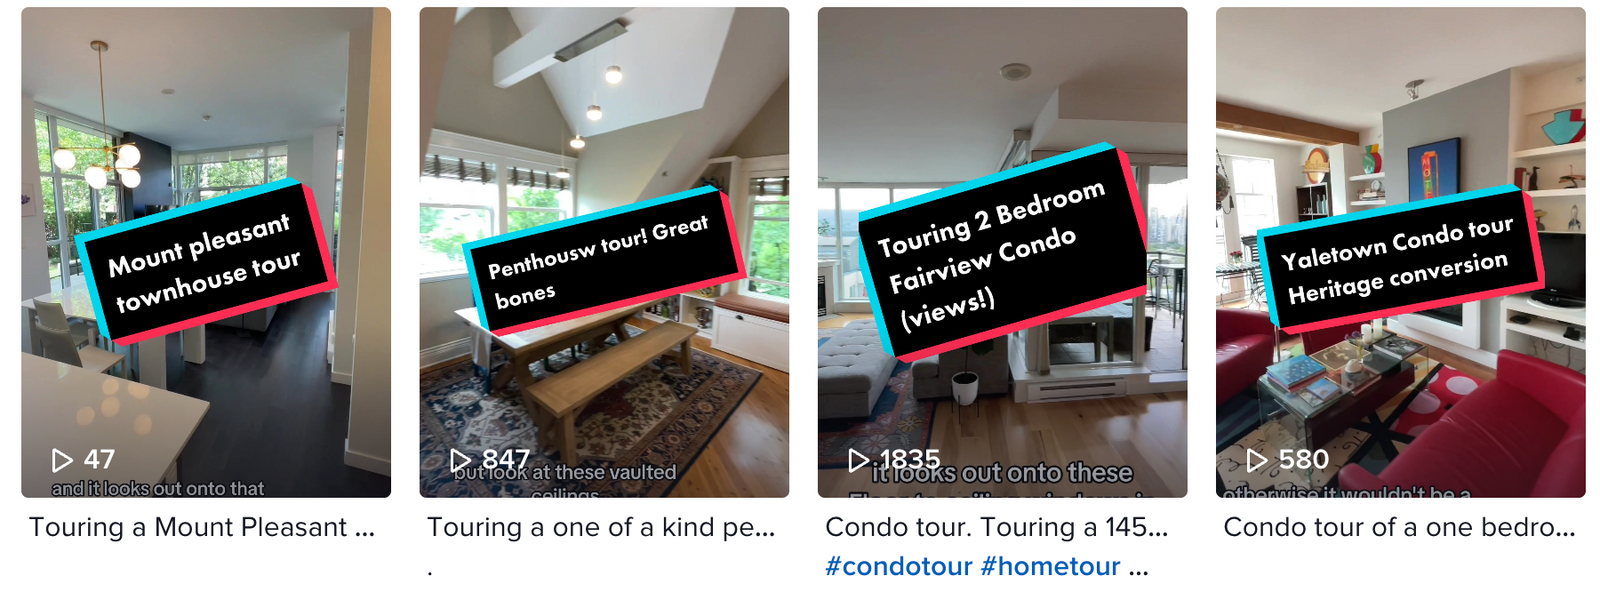 #TouringWithTyler Property Info - Yaletown, Mount Pleasant and Fairview